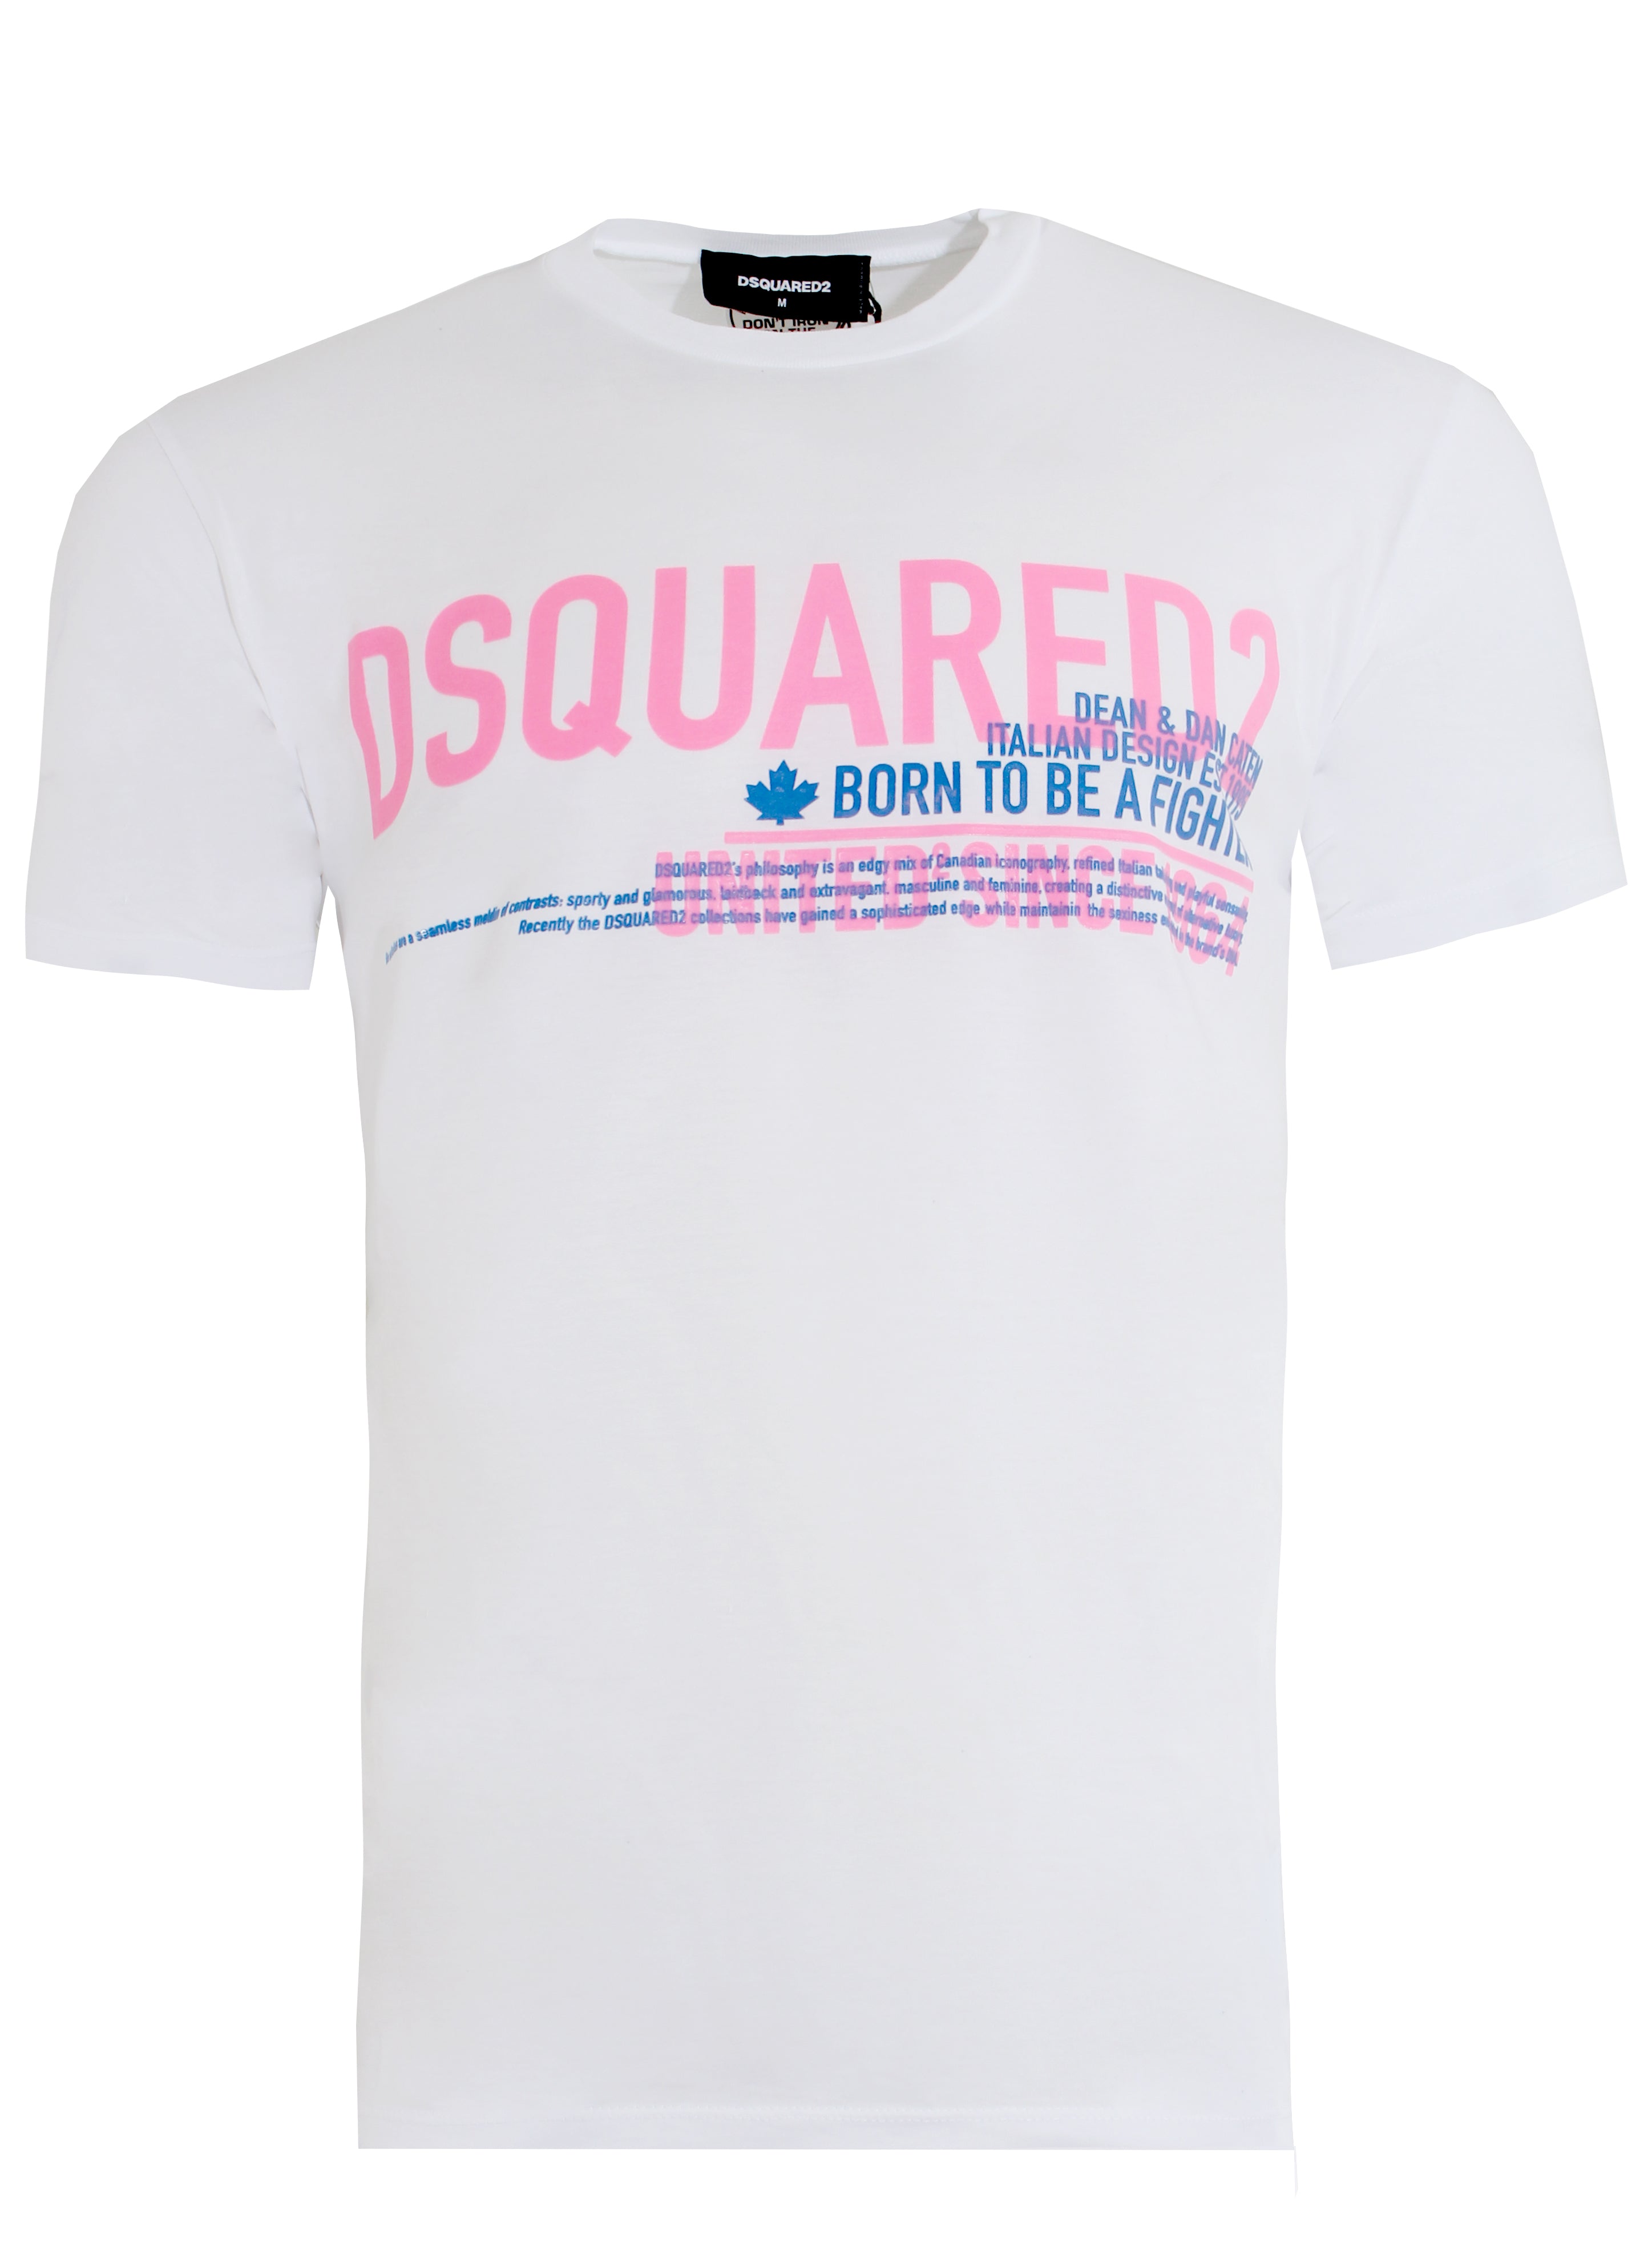 Men's Dsquared2 Born to be a Fighter Tee Shirt